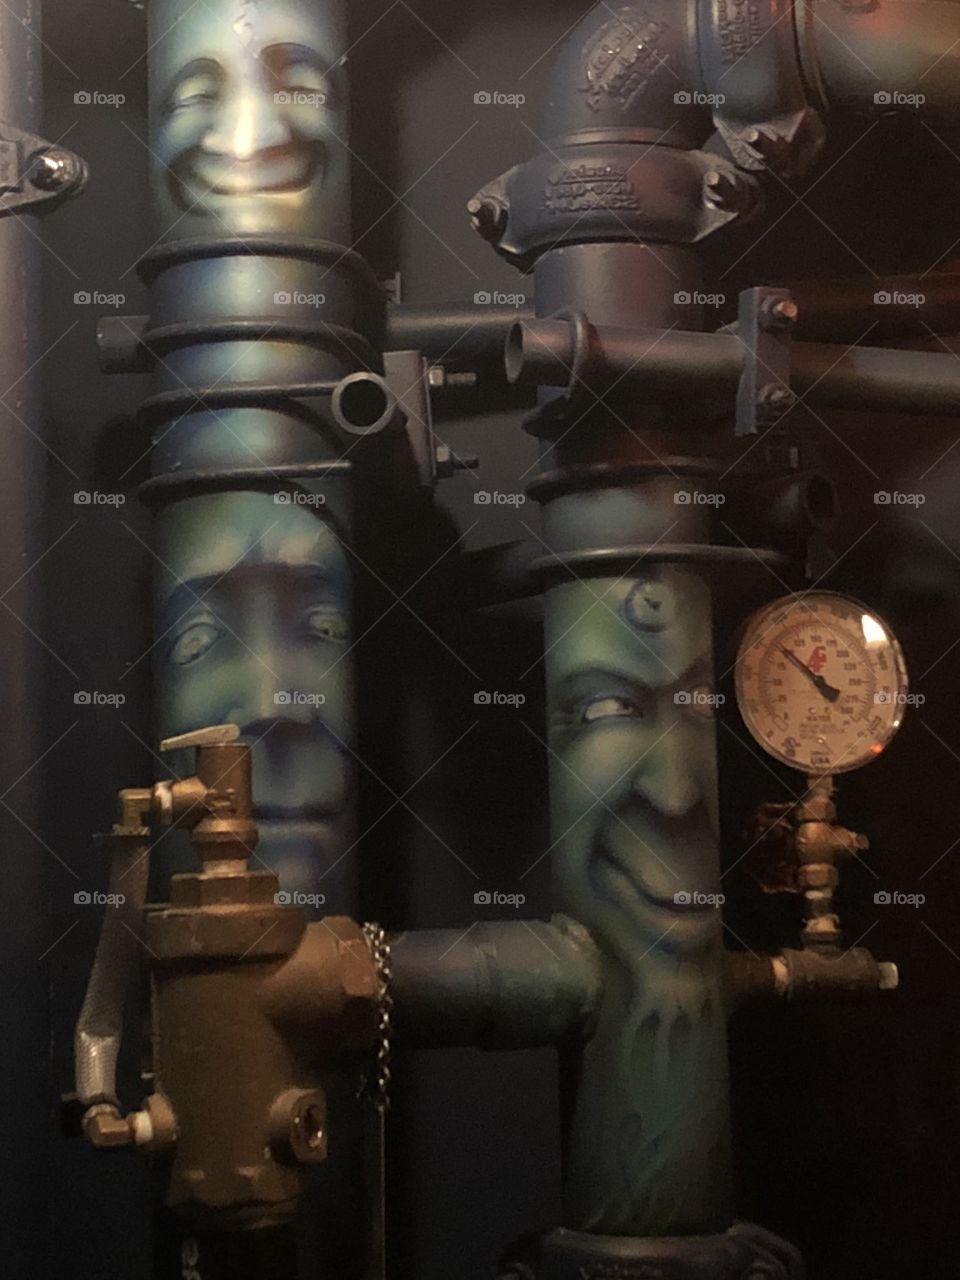 Some pipes